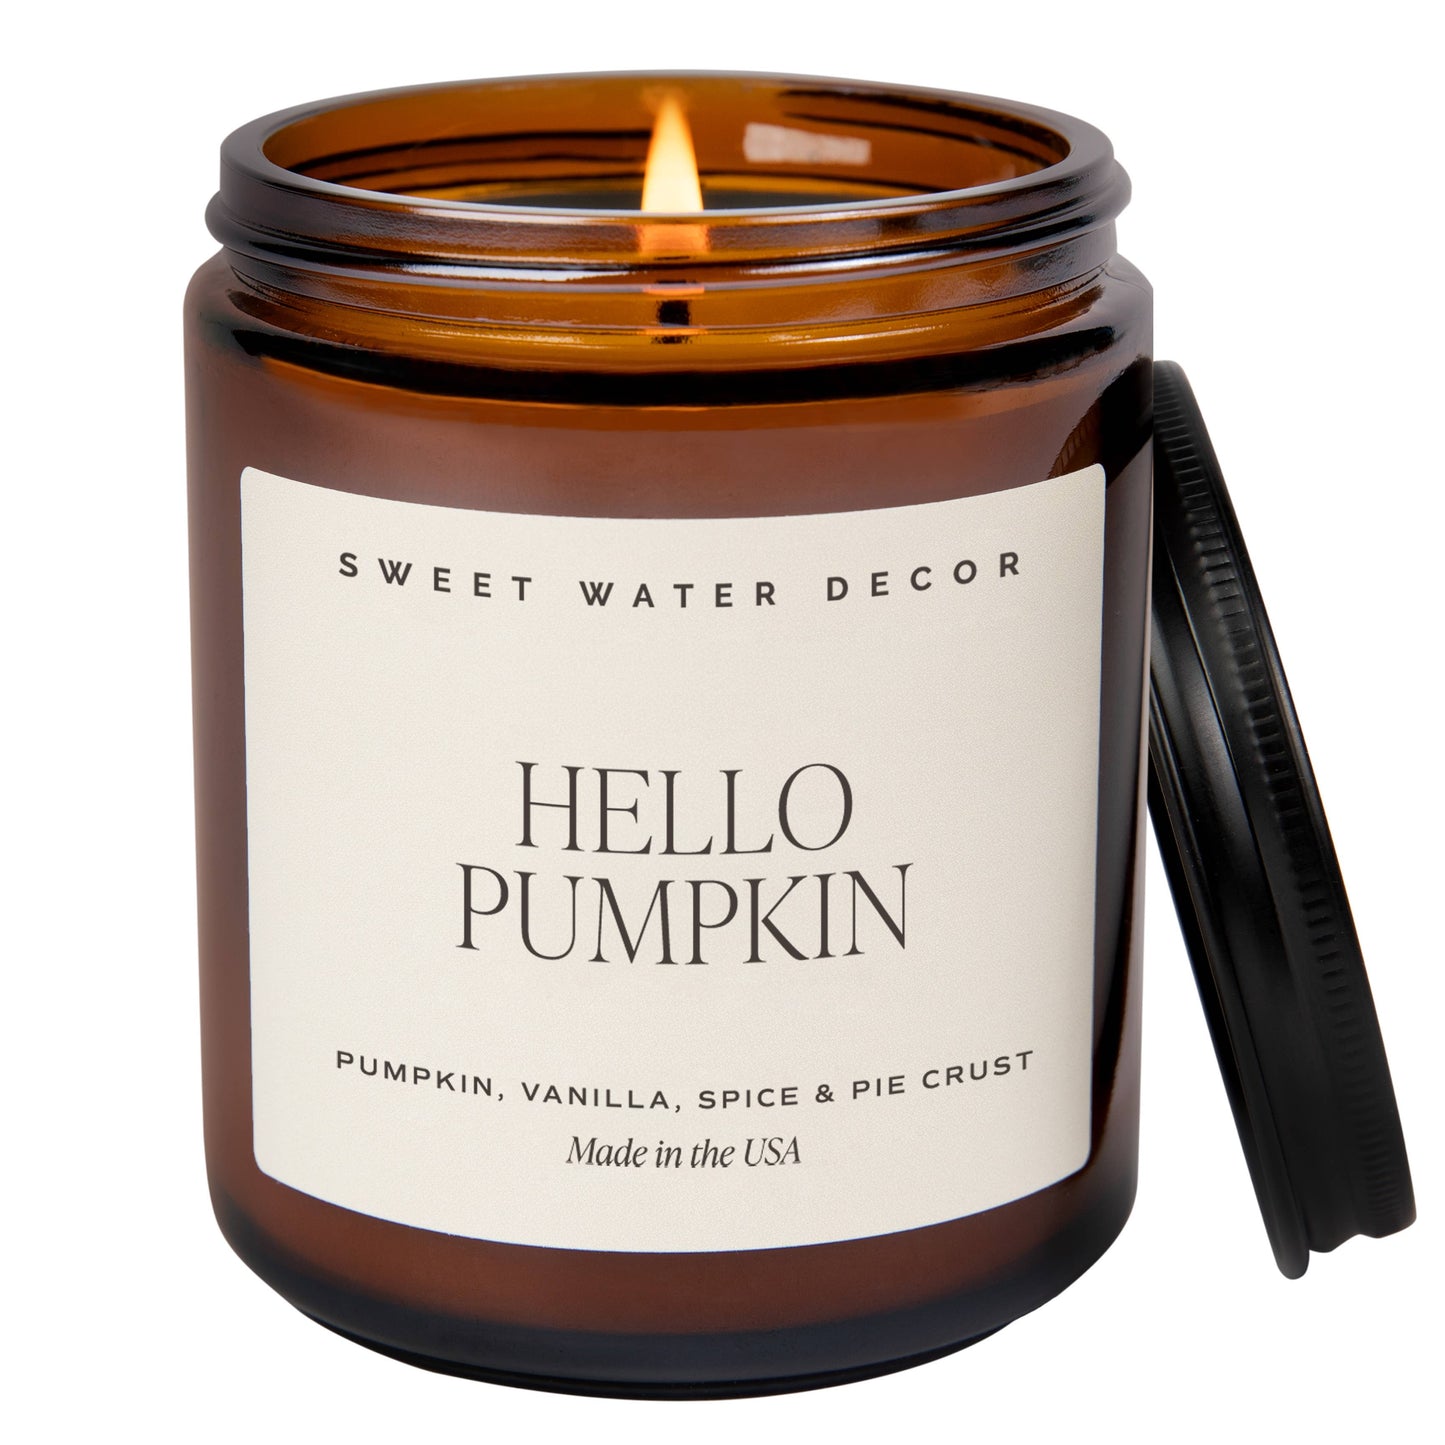 Sweet Water Decor Hello Pumpkin 9 oz Soy Candle